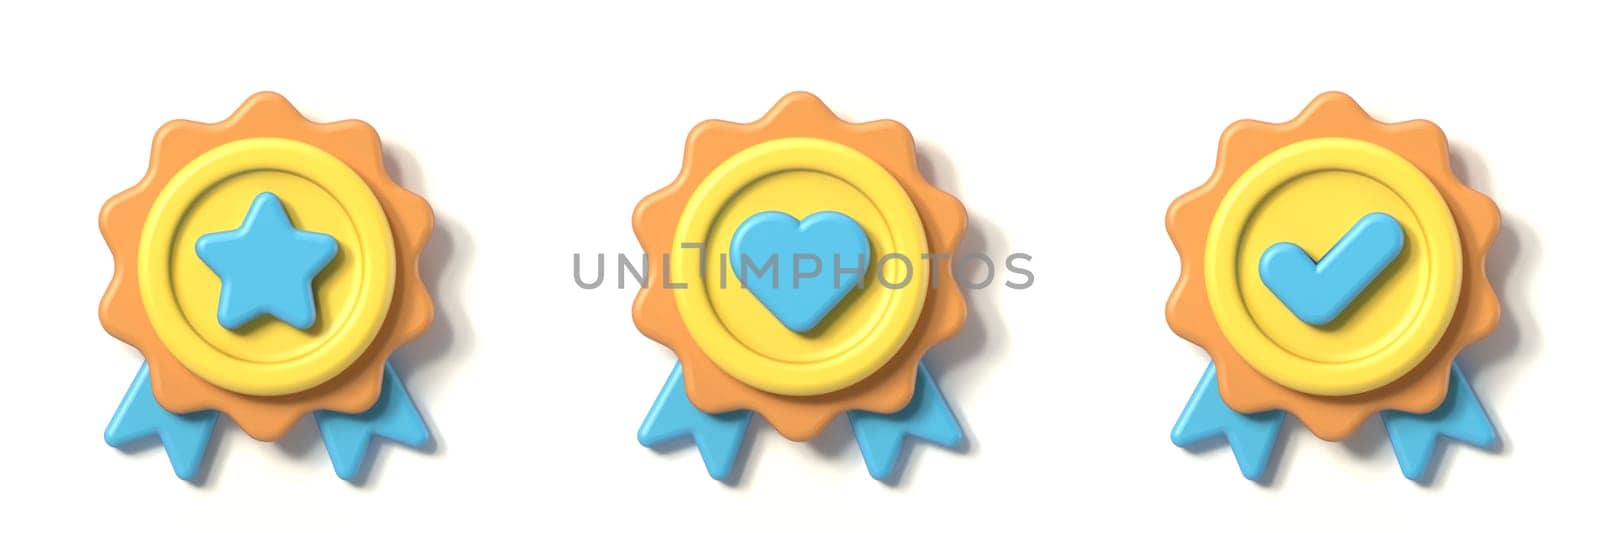 Blue yellow orange badge icon with star, heart and check mark 3D rendering illustration isolated on white background